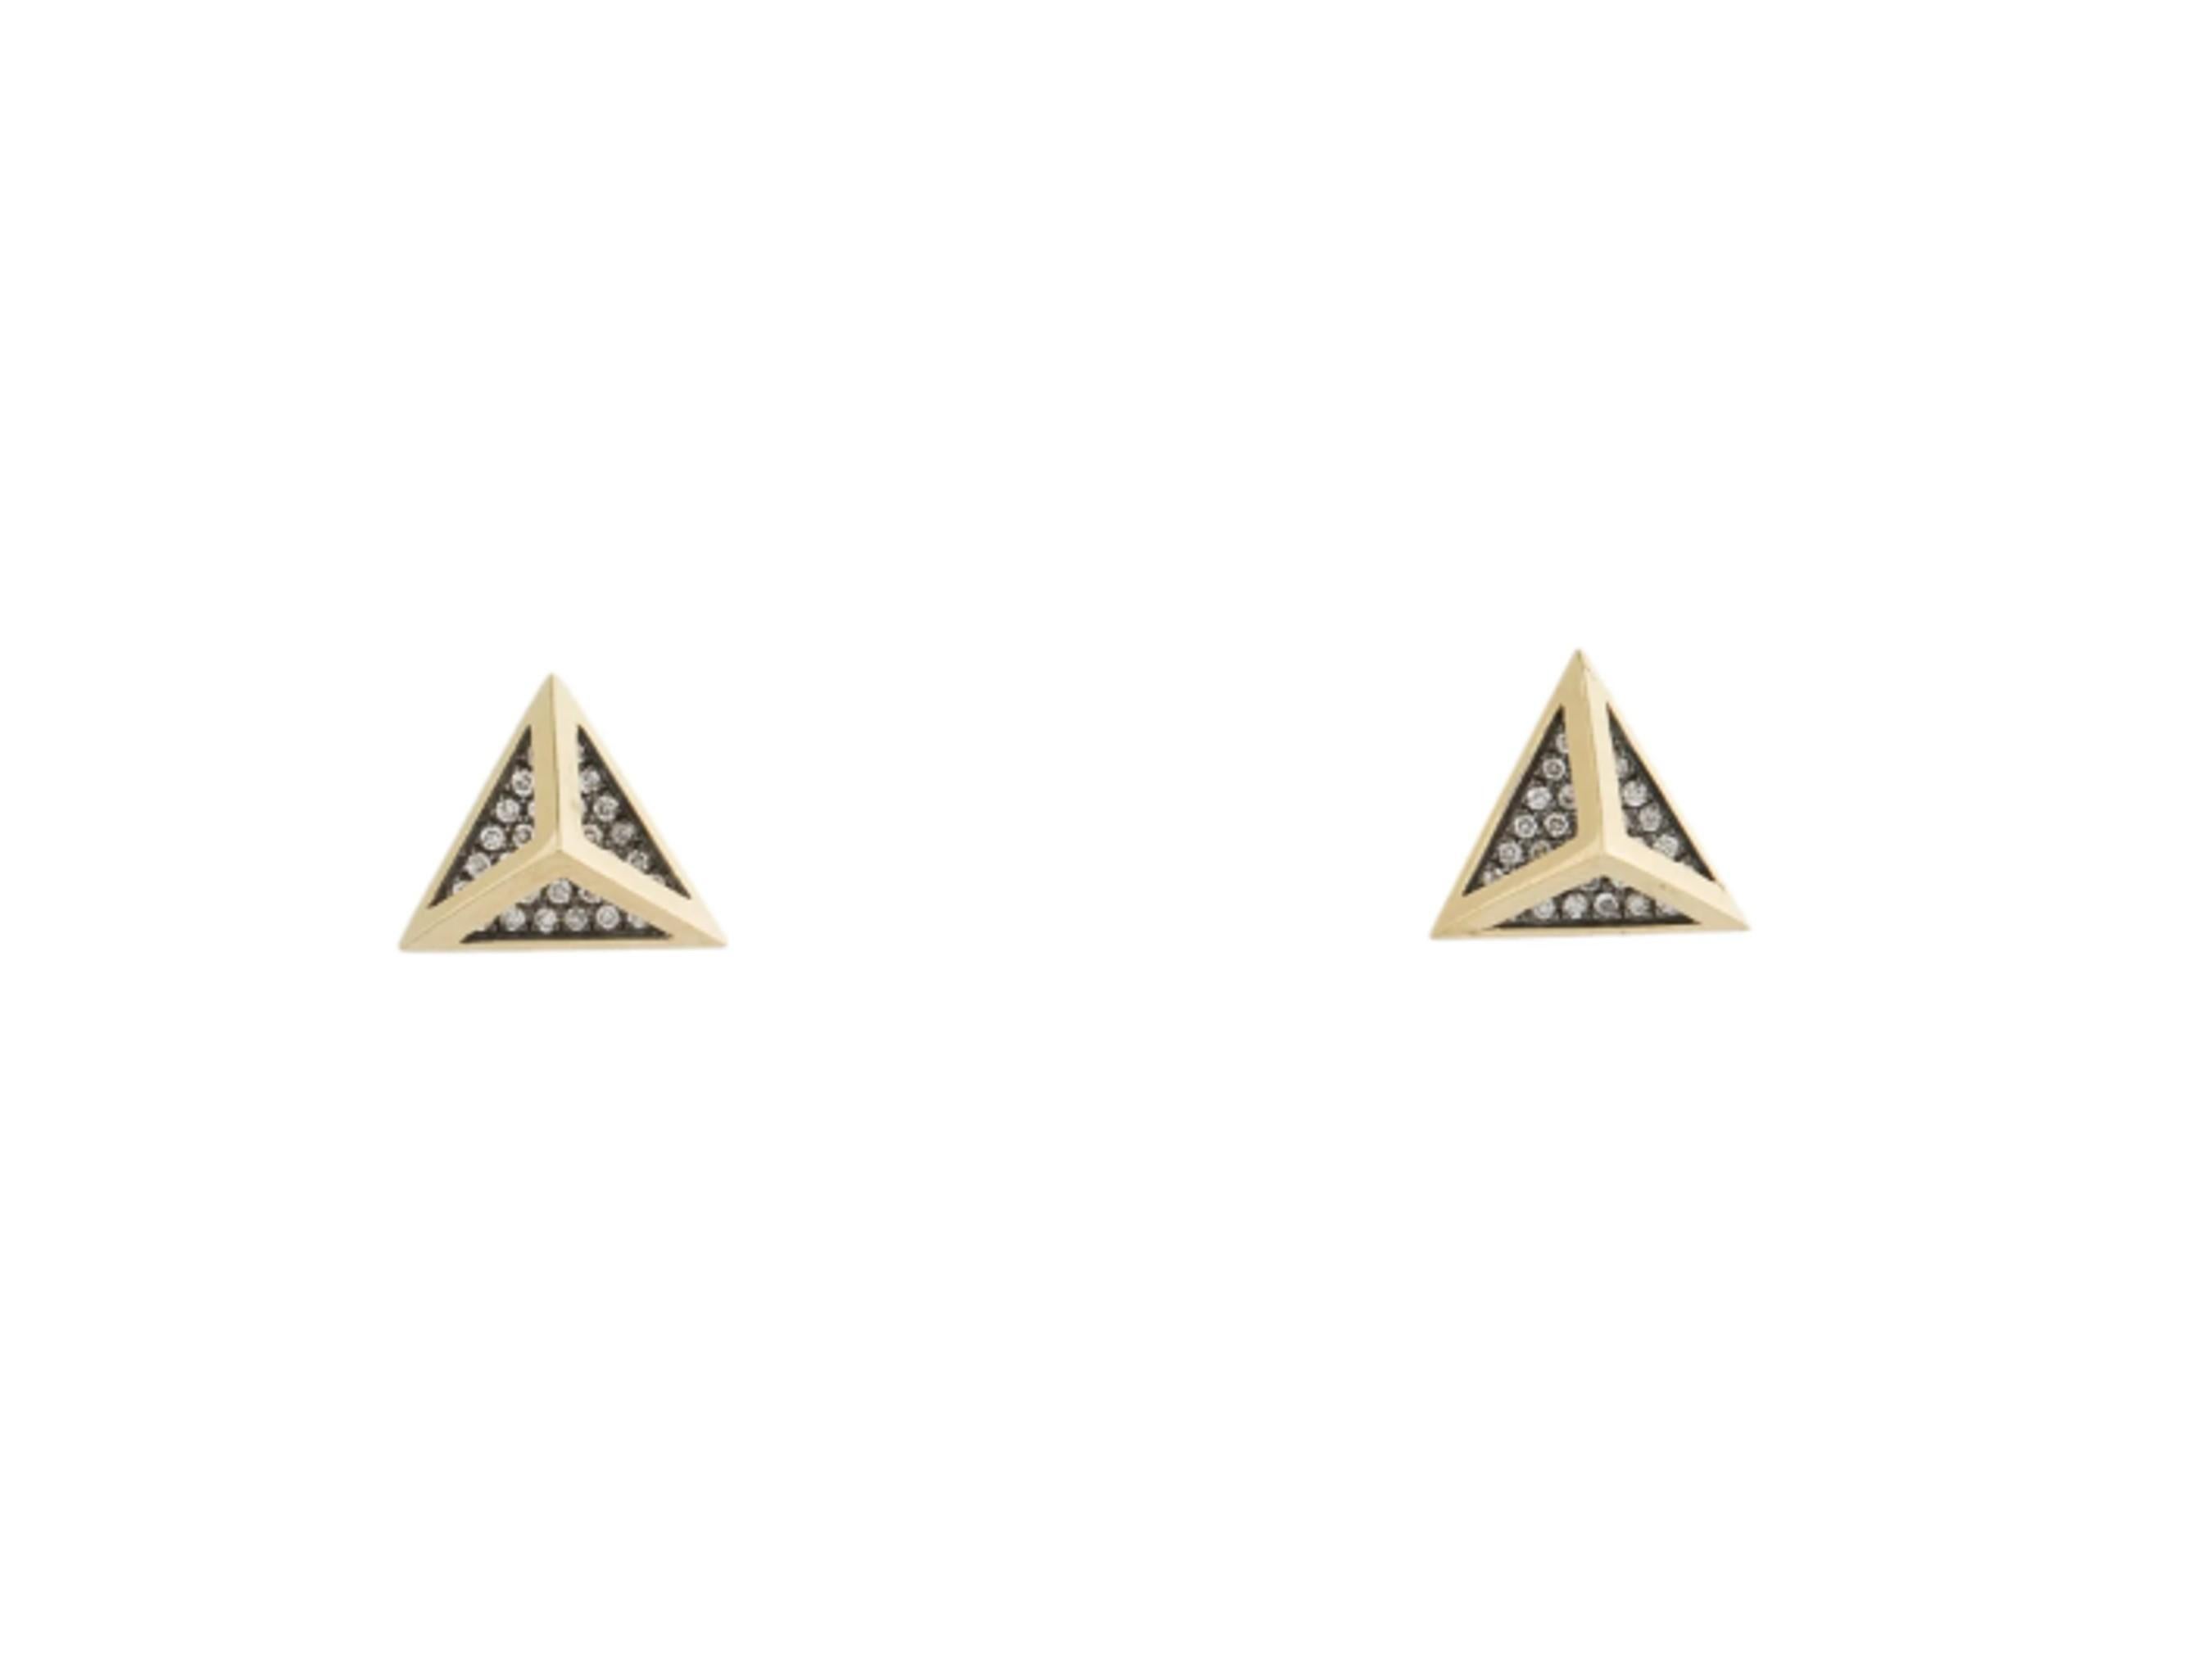 Dramatic yellow gold, blackened gold and diamond earrings from Noor Fares' Geometry 101 collection. The earrings' dimensional shape create an edgy look that stands out far from the typical diamond stud earring. The earrings are comprised of an 18k